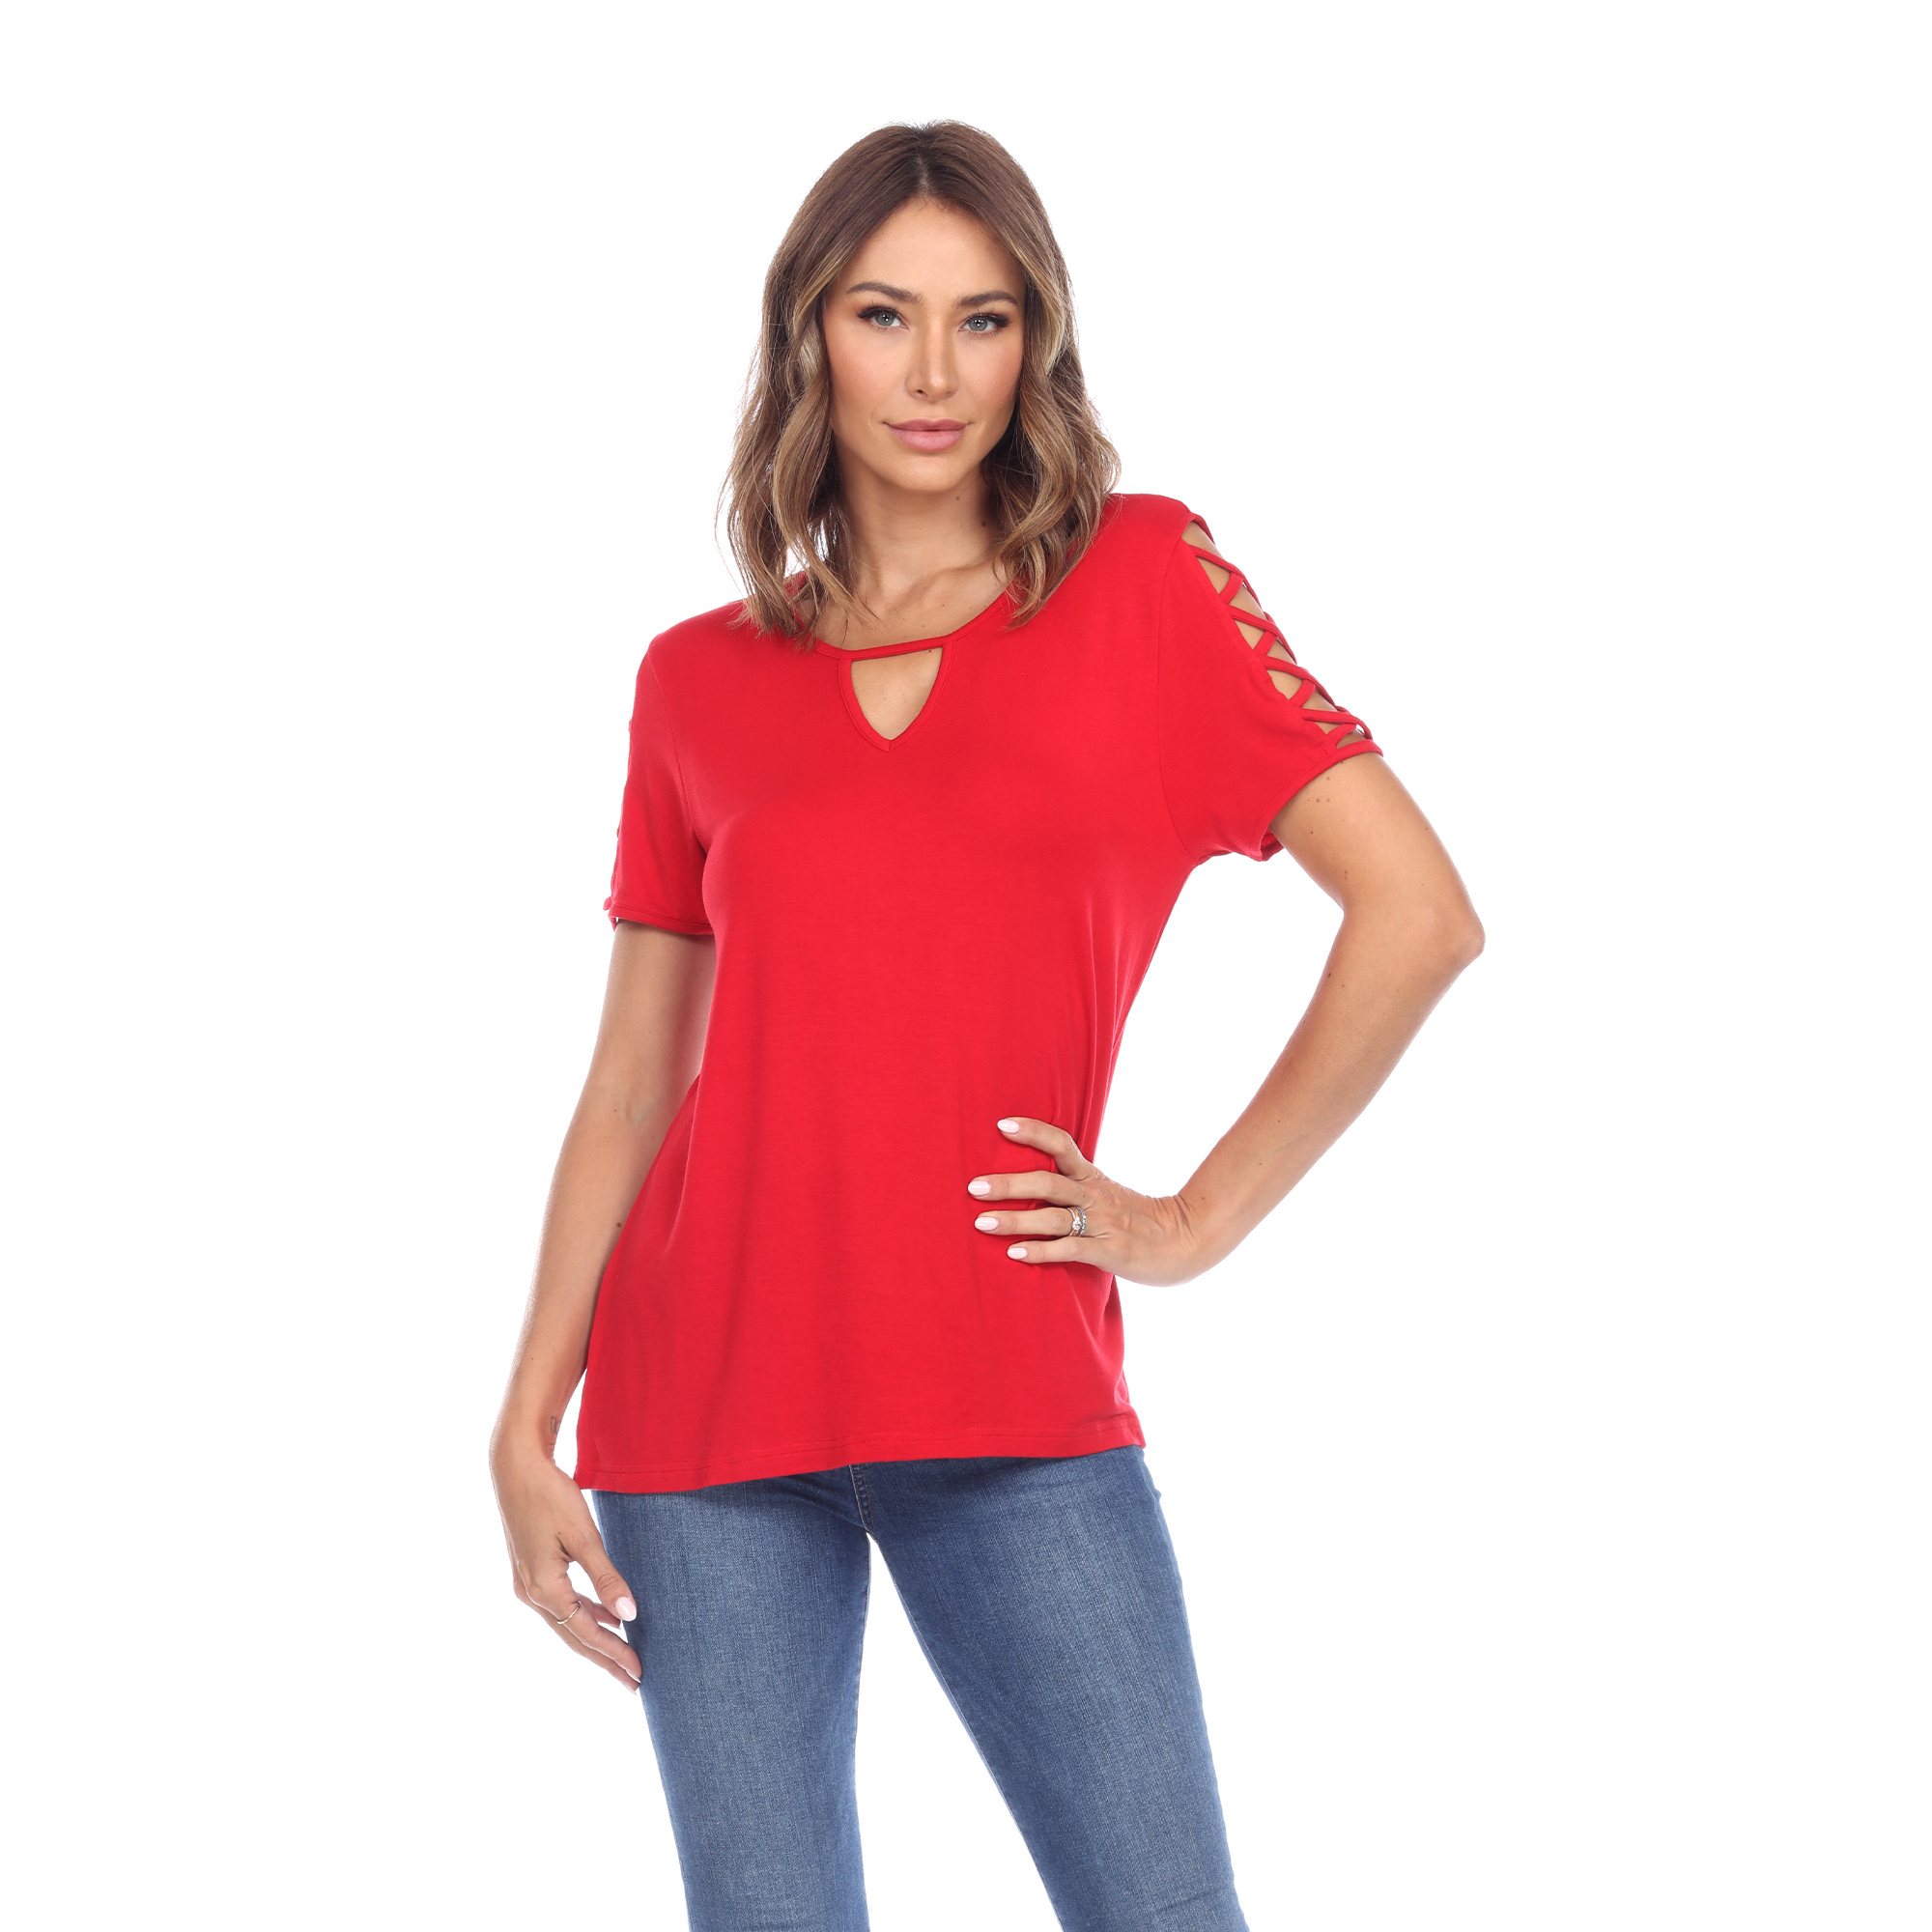 White Mark Women's Keyhole Neck Cutout Short Sleeve Top - Red, Small